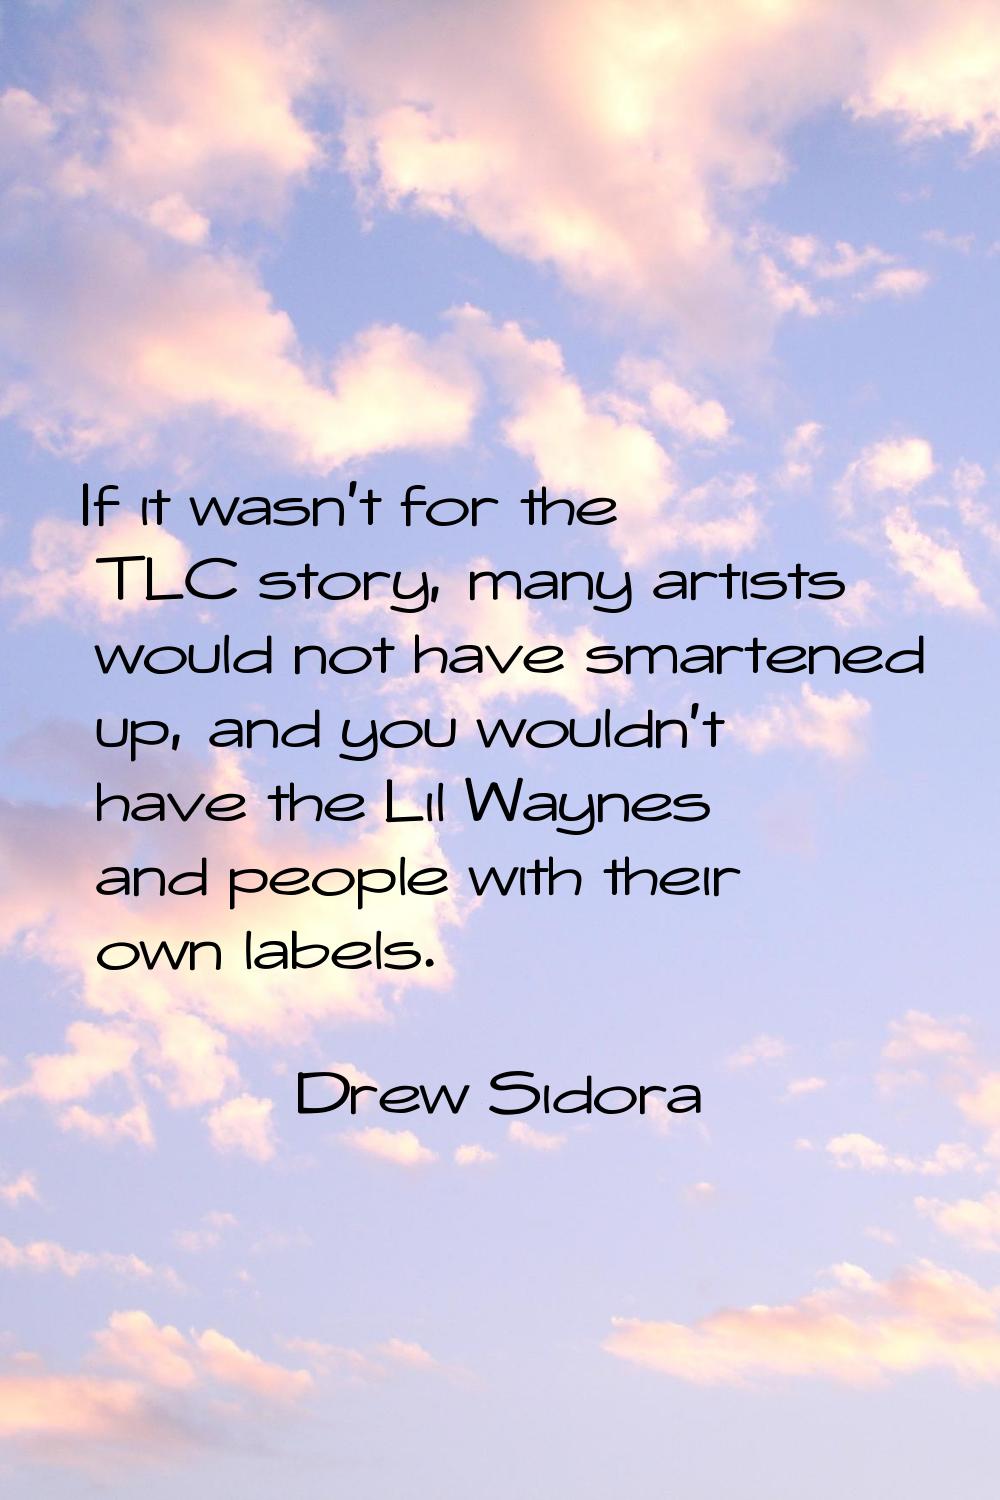 If it wasn't for the TLC story, many artists would not have smartened up, and you wouldn't have the